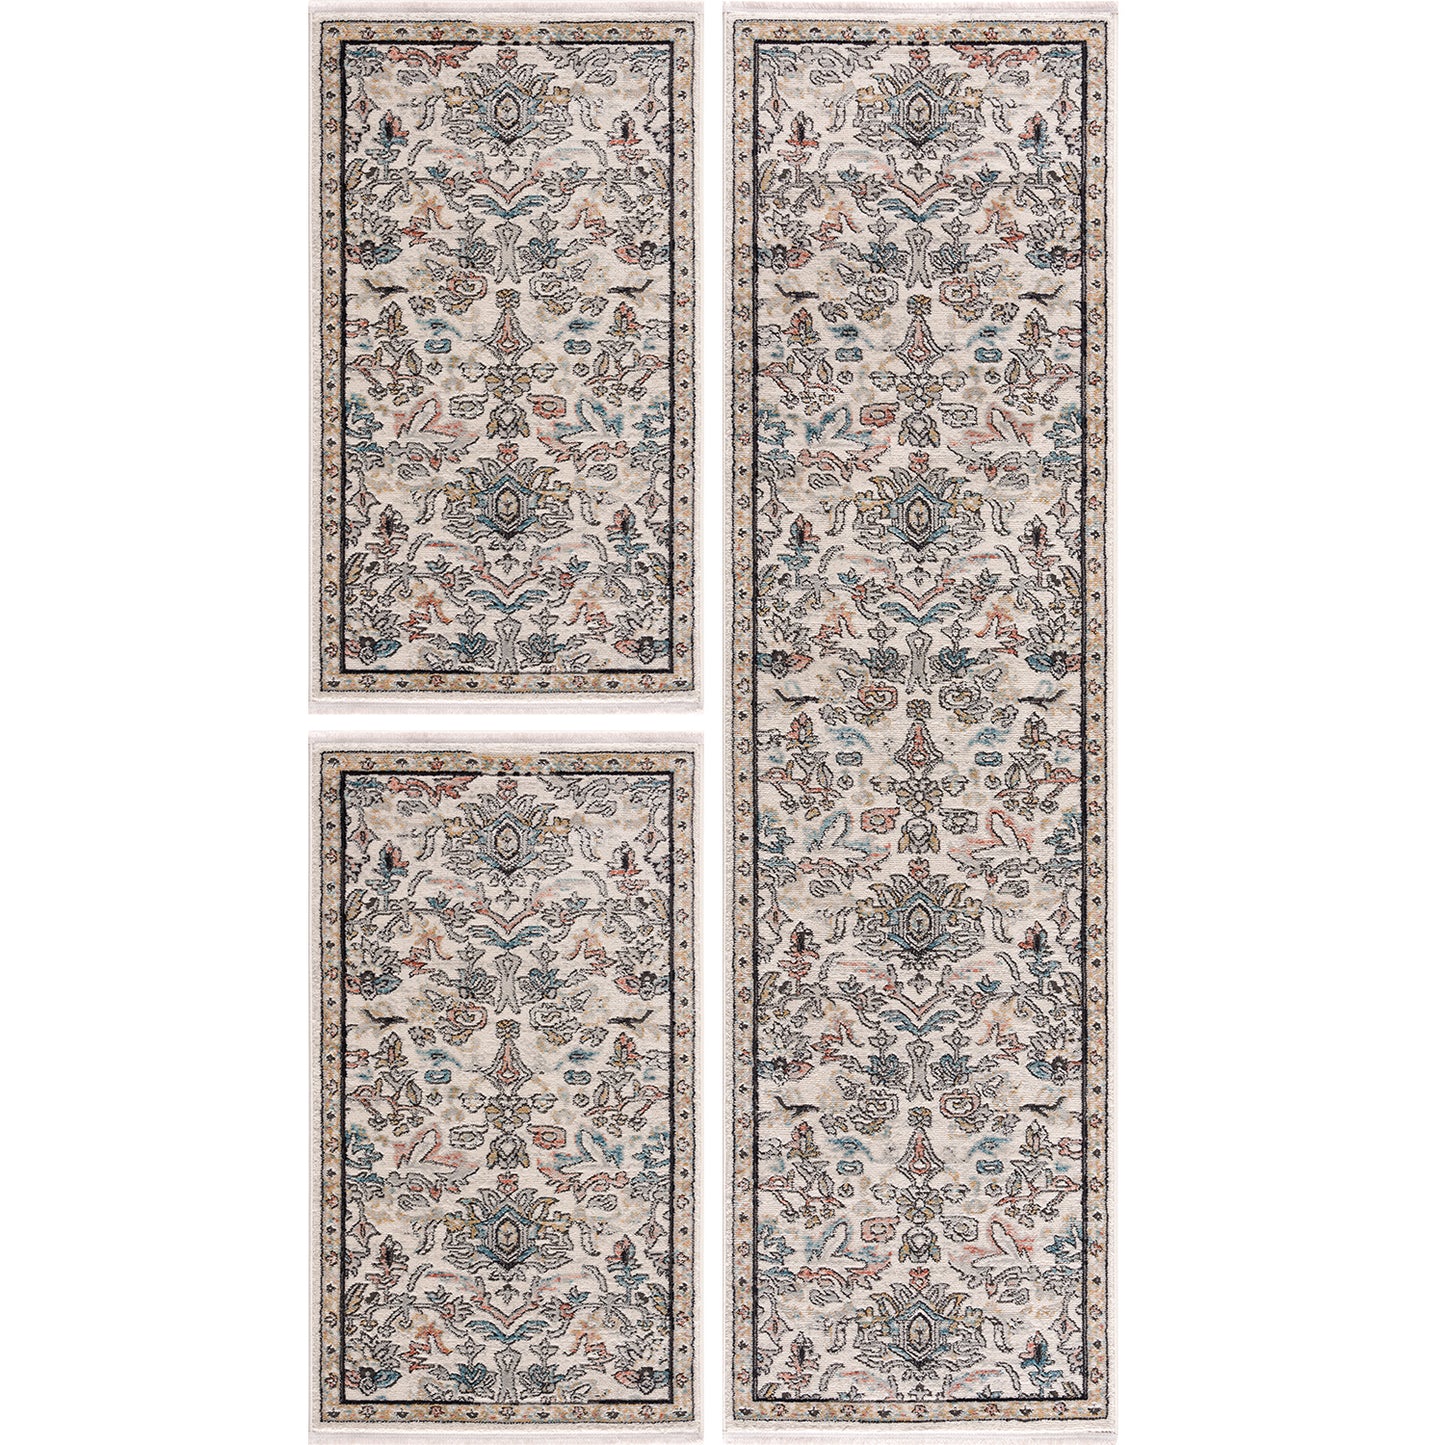 la dole rugs traditional persian oriental paisly ivory grey teal turquoise red orange area rug 9x12, 10x13 ft Large Big Carpet, Living Room, Beroom